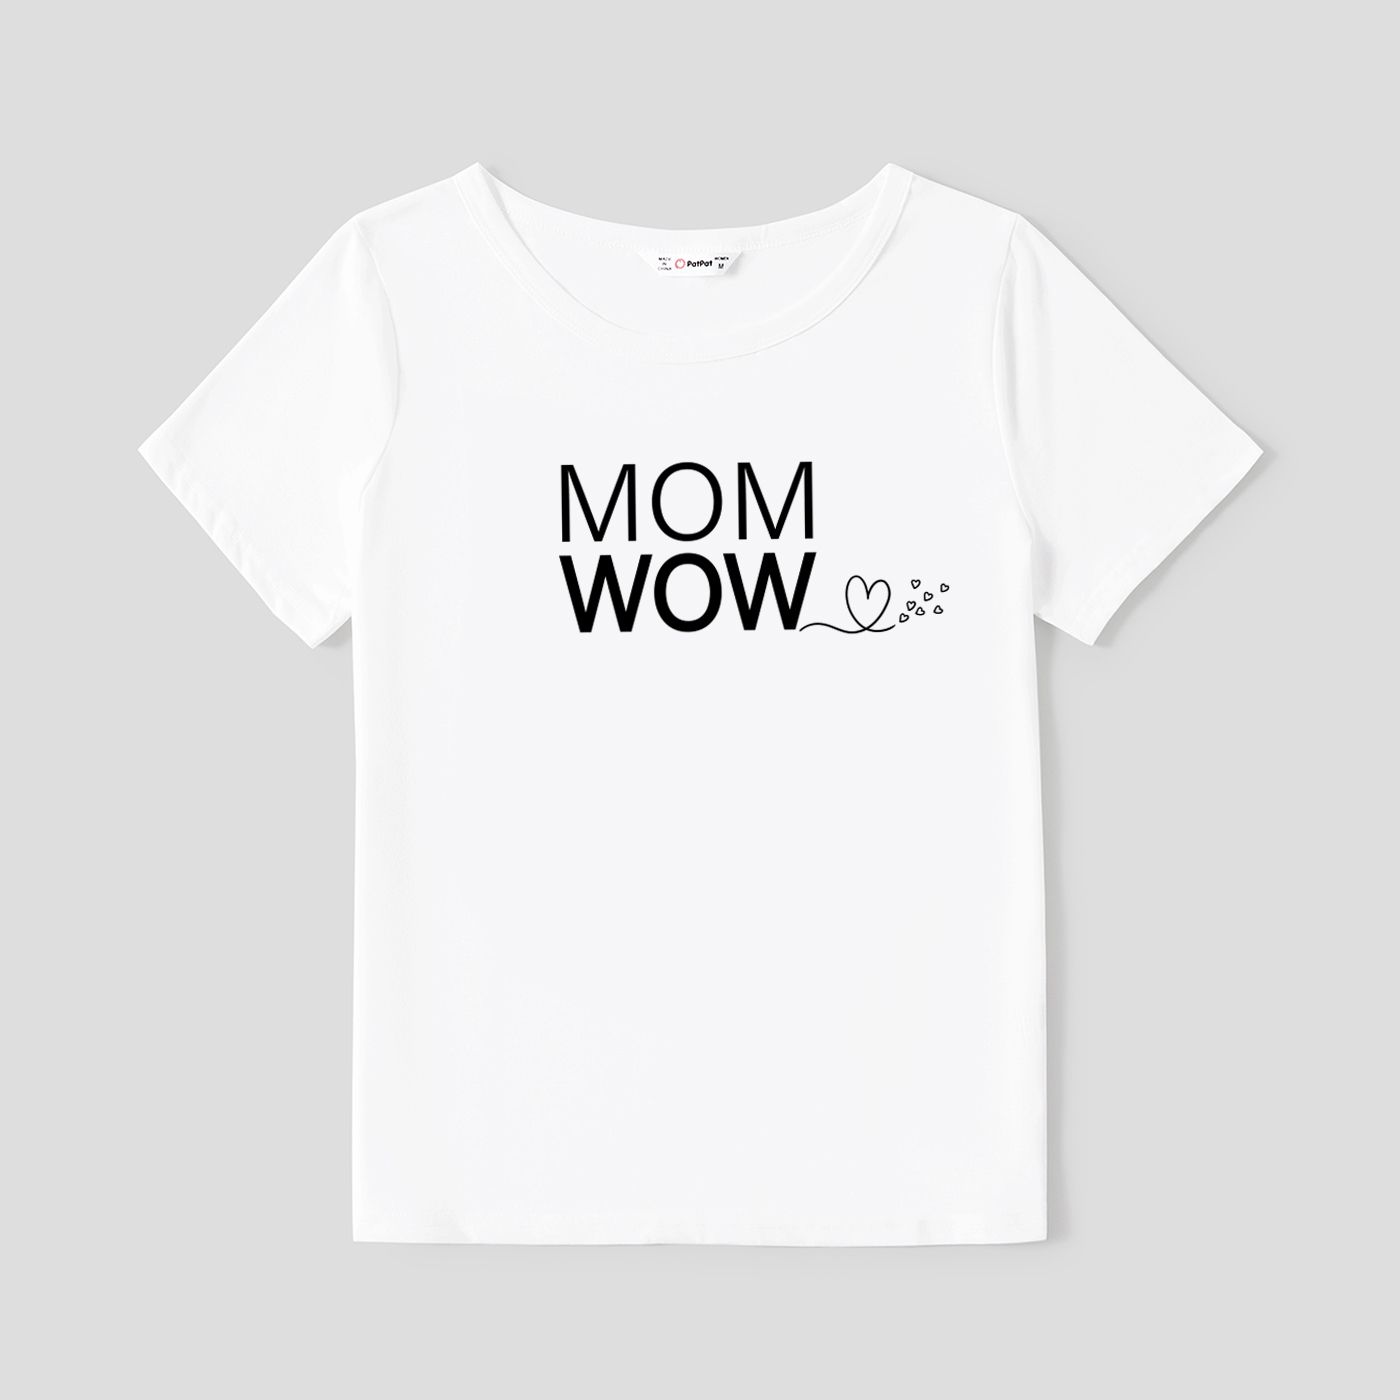 Mother's Day Mommy and Me Short Sleeves Slogan Print Whit Tops